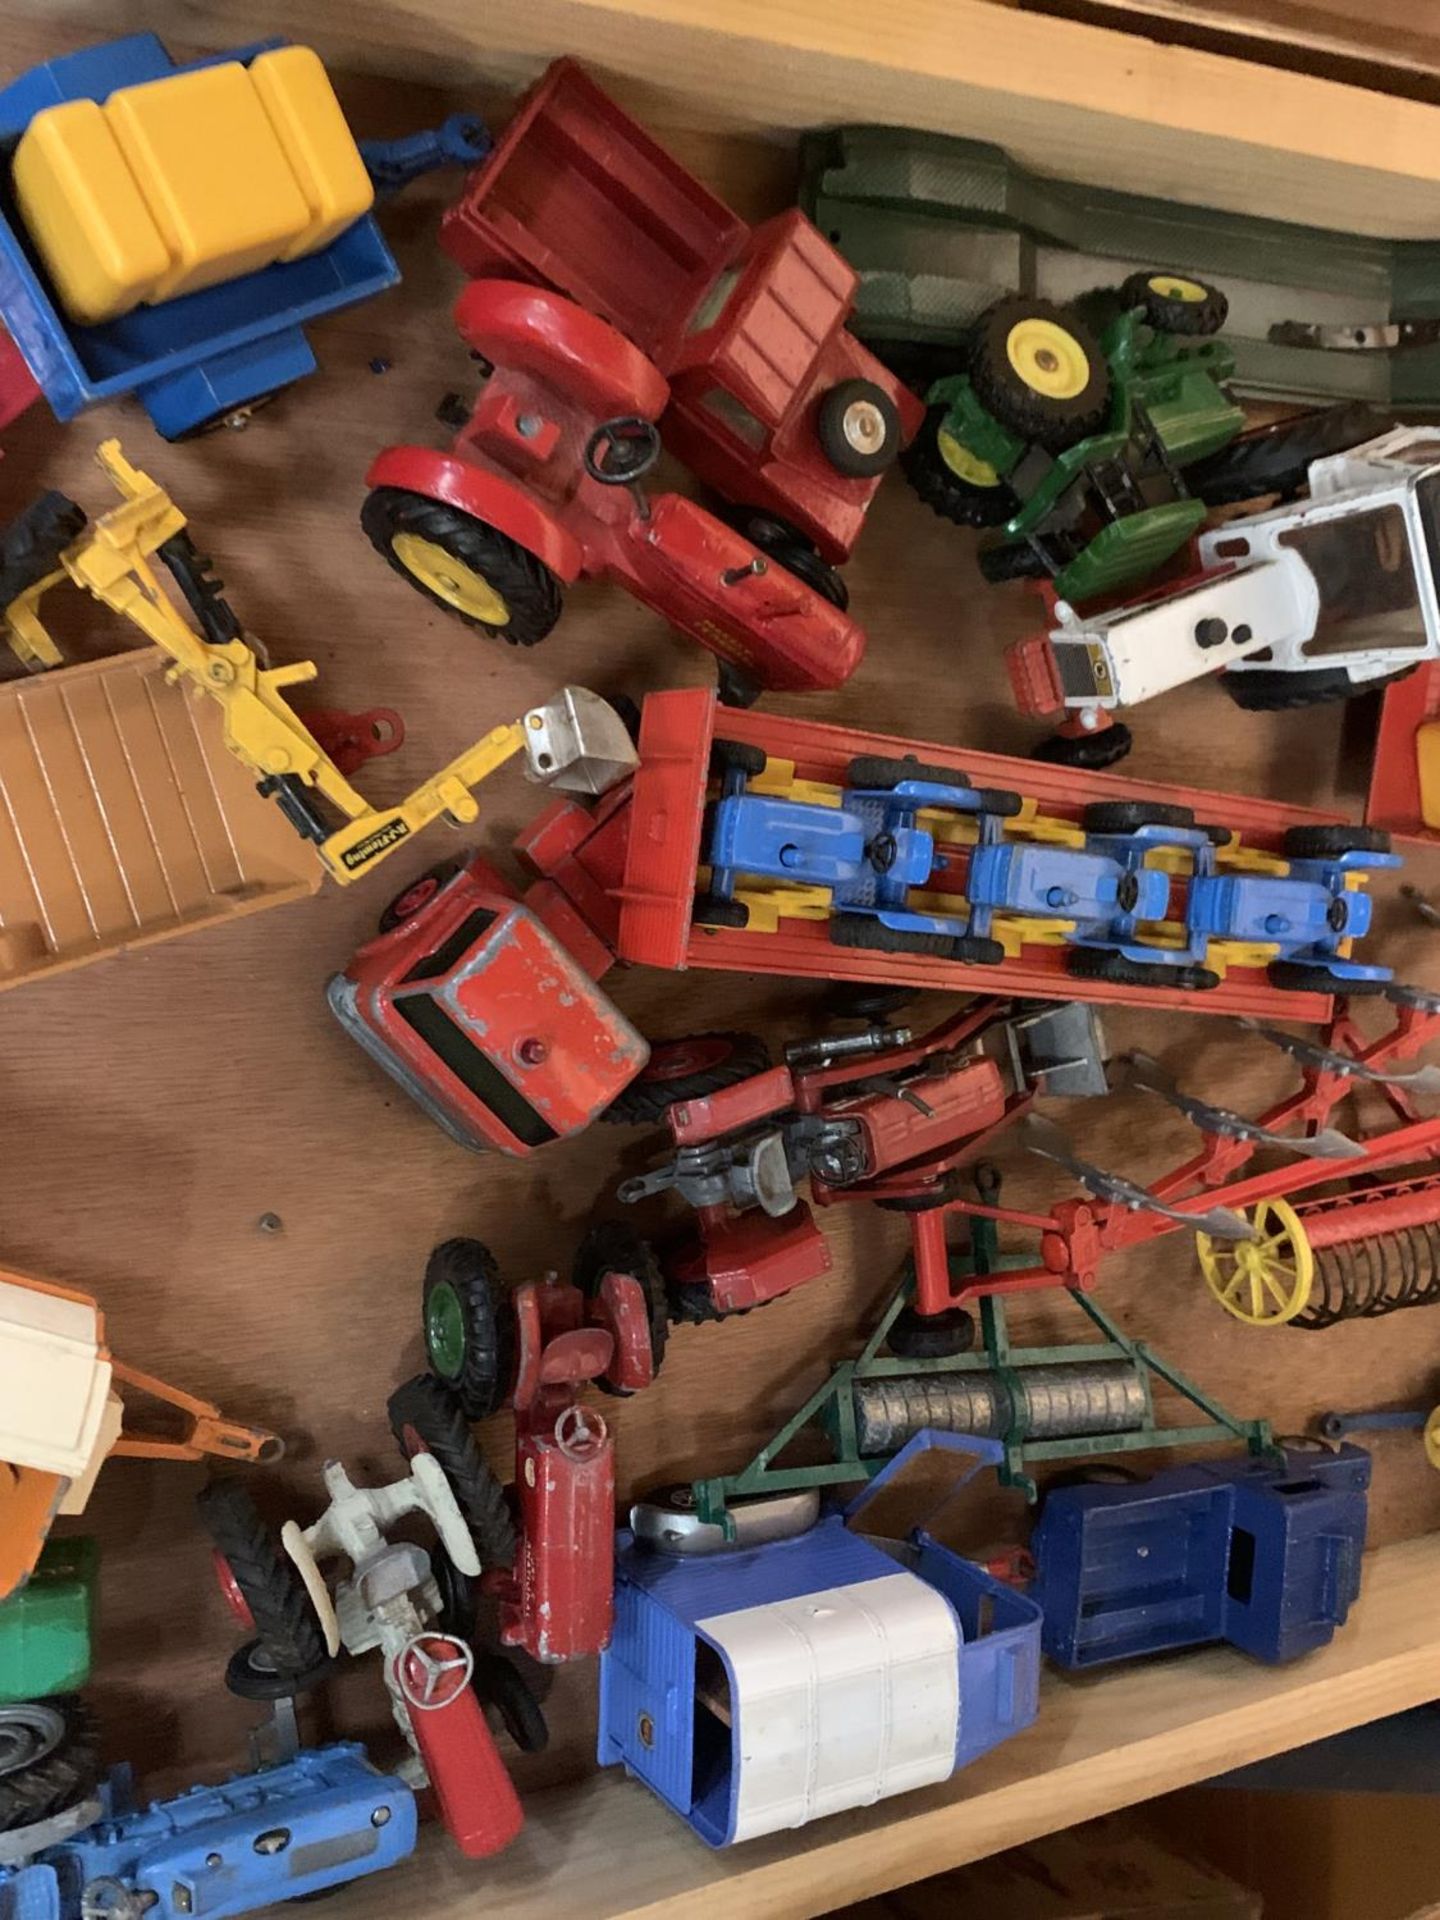 A WOODEN TRAY OF VINTAGE DIE CAST MODEL FARM VEHICLES - Image 3 of 4